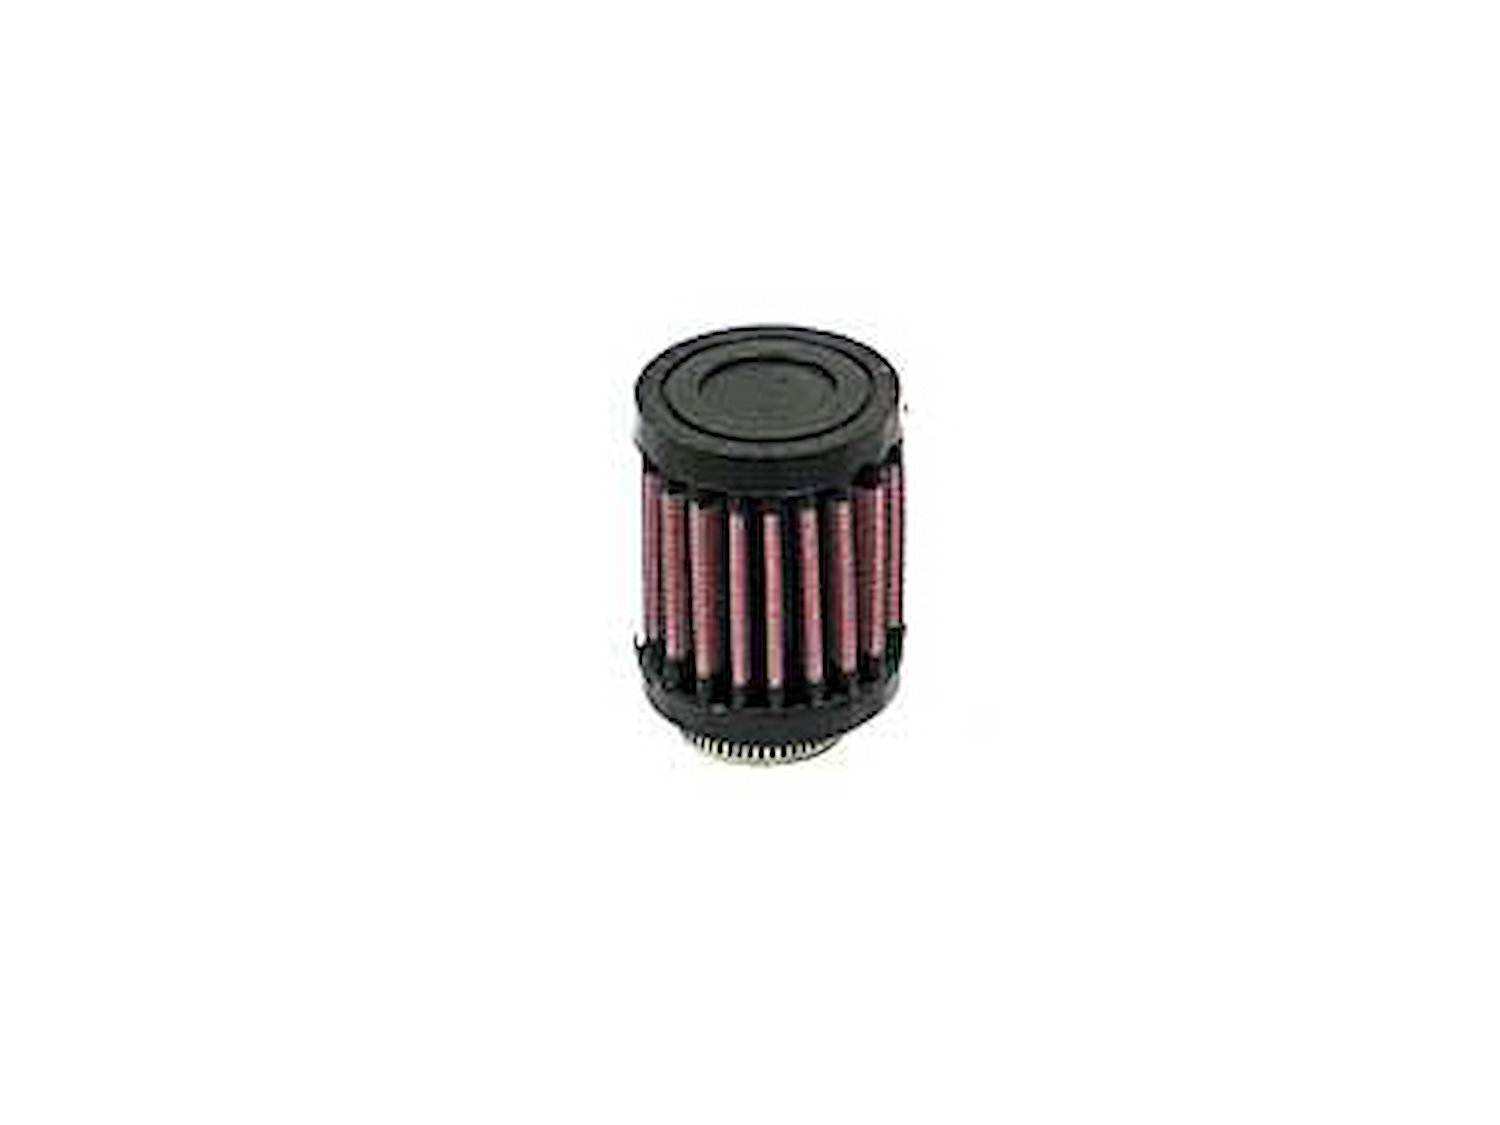 Round Straight Air Filter Flange Dia. (F): 0.75" (19 mm)